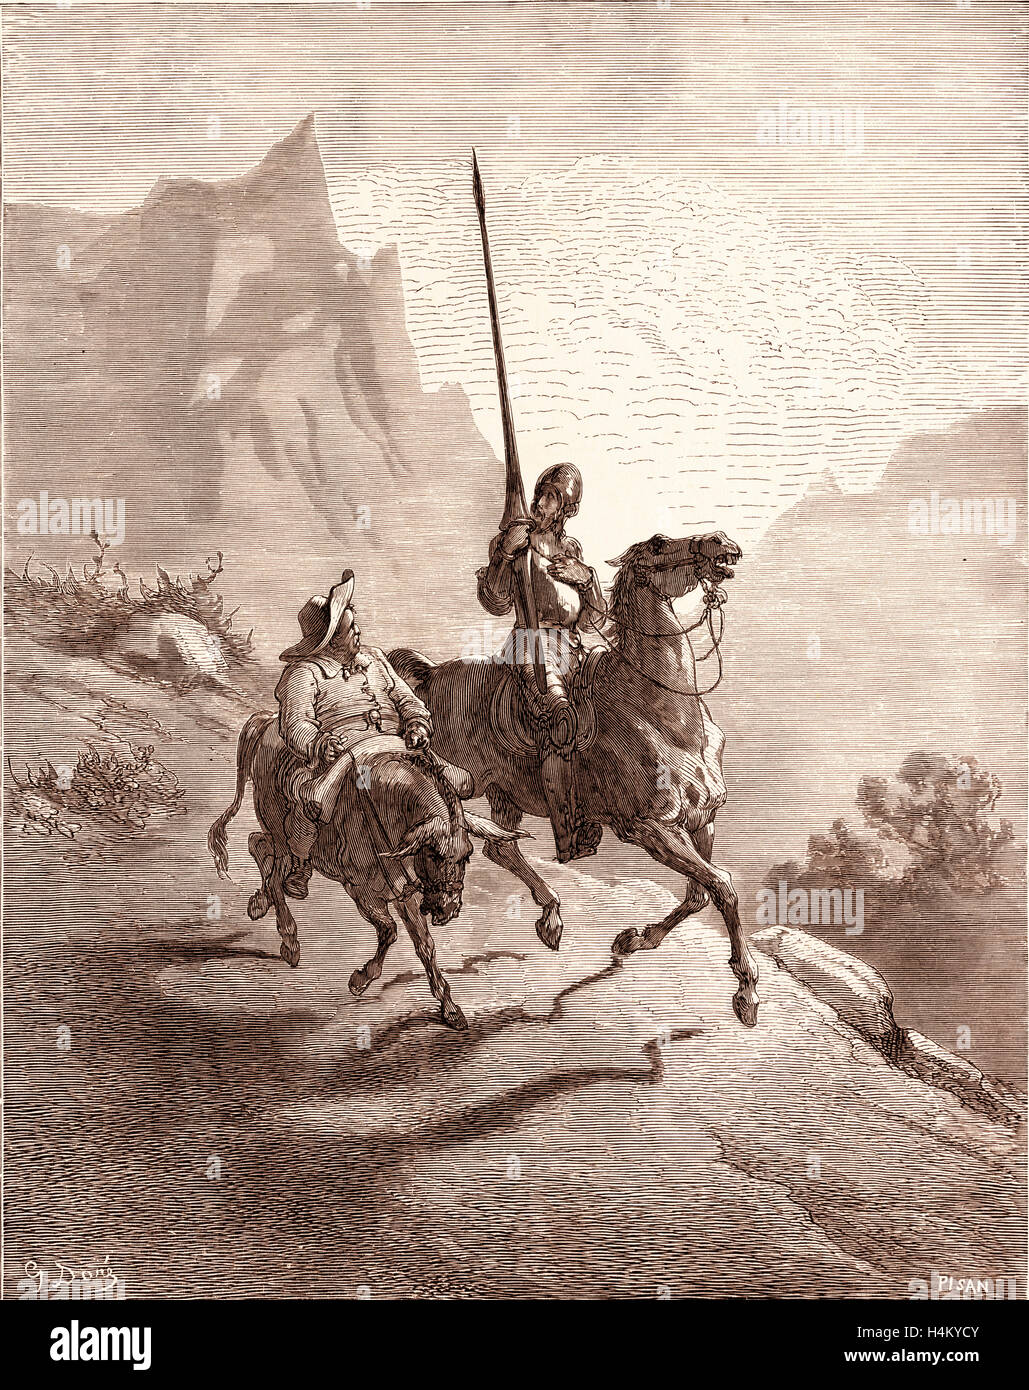 Don Quixote and Sancho Setting Out, by Gustave Dore, 1832 - 1883, French.  Engraving for Don Quixote by Miguel De Cervantes. 1870 Stock Photo - Alamy